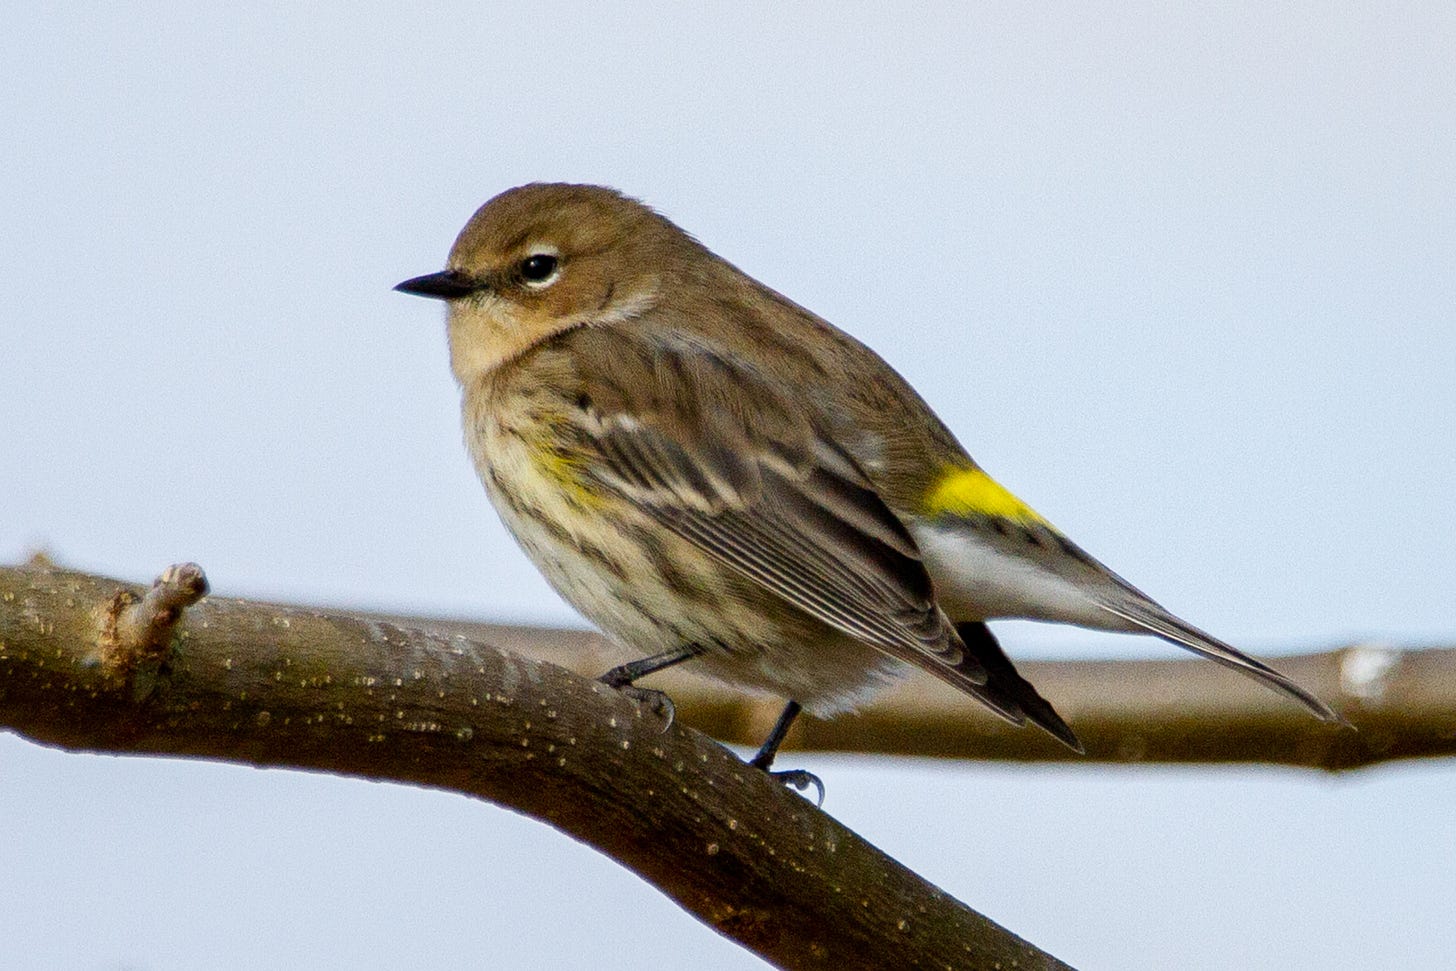 A close-up image of a yellow-rumped warbler, a small brown bird with a bright yellow patch at the base of its back above the tail